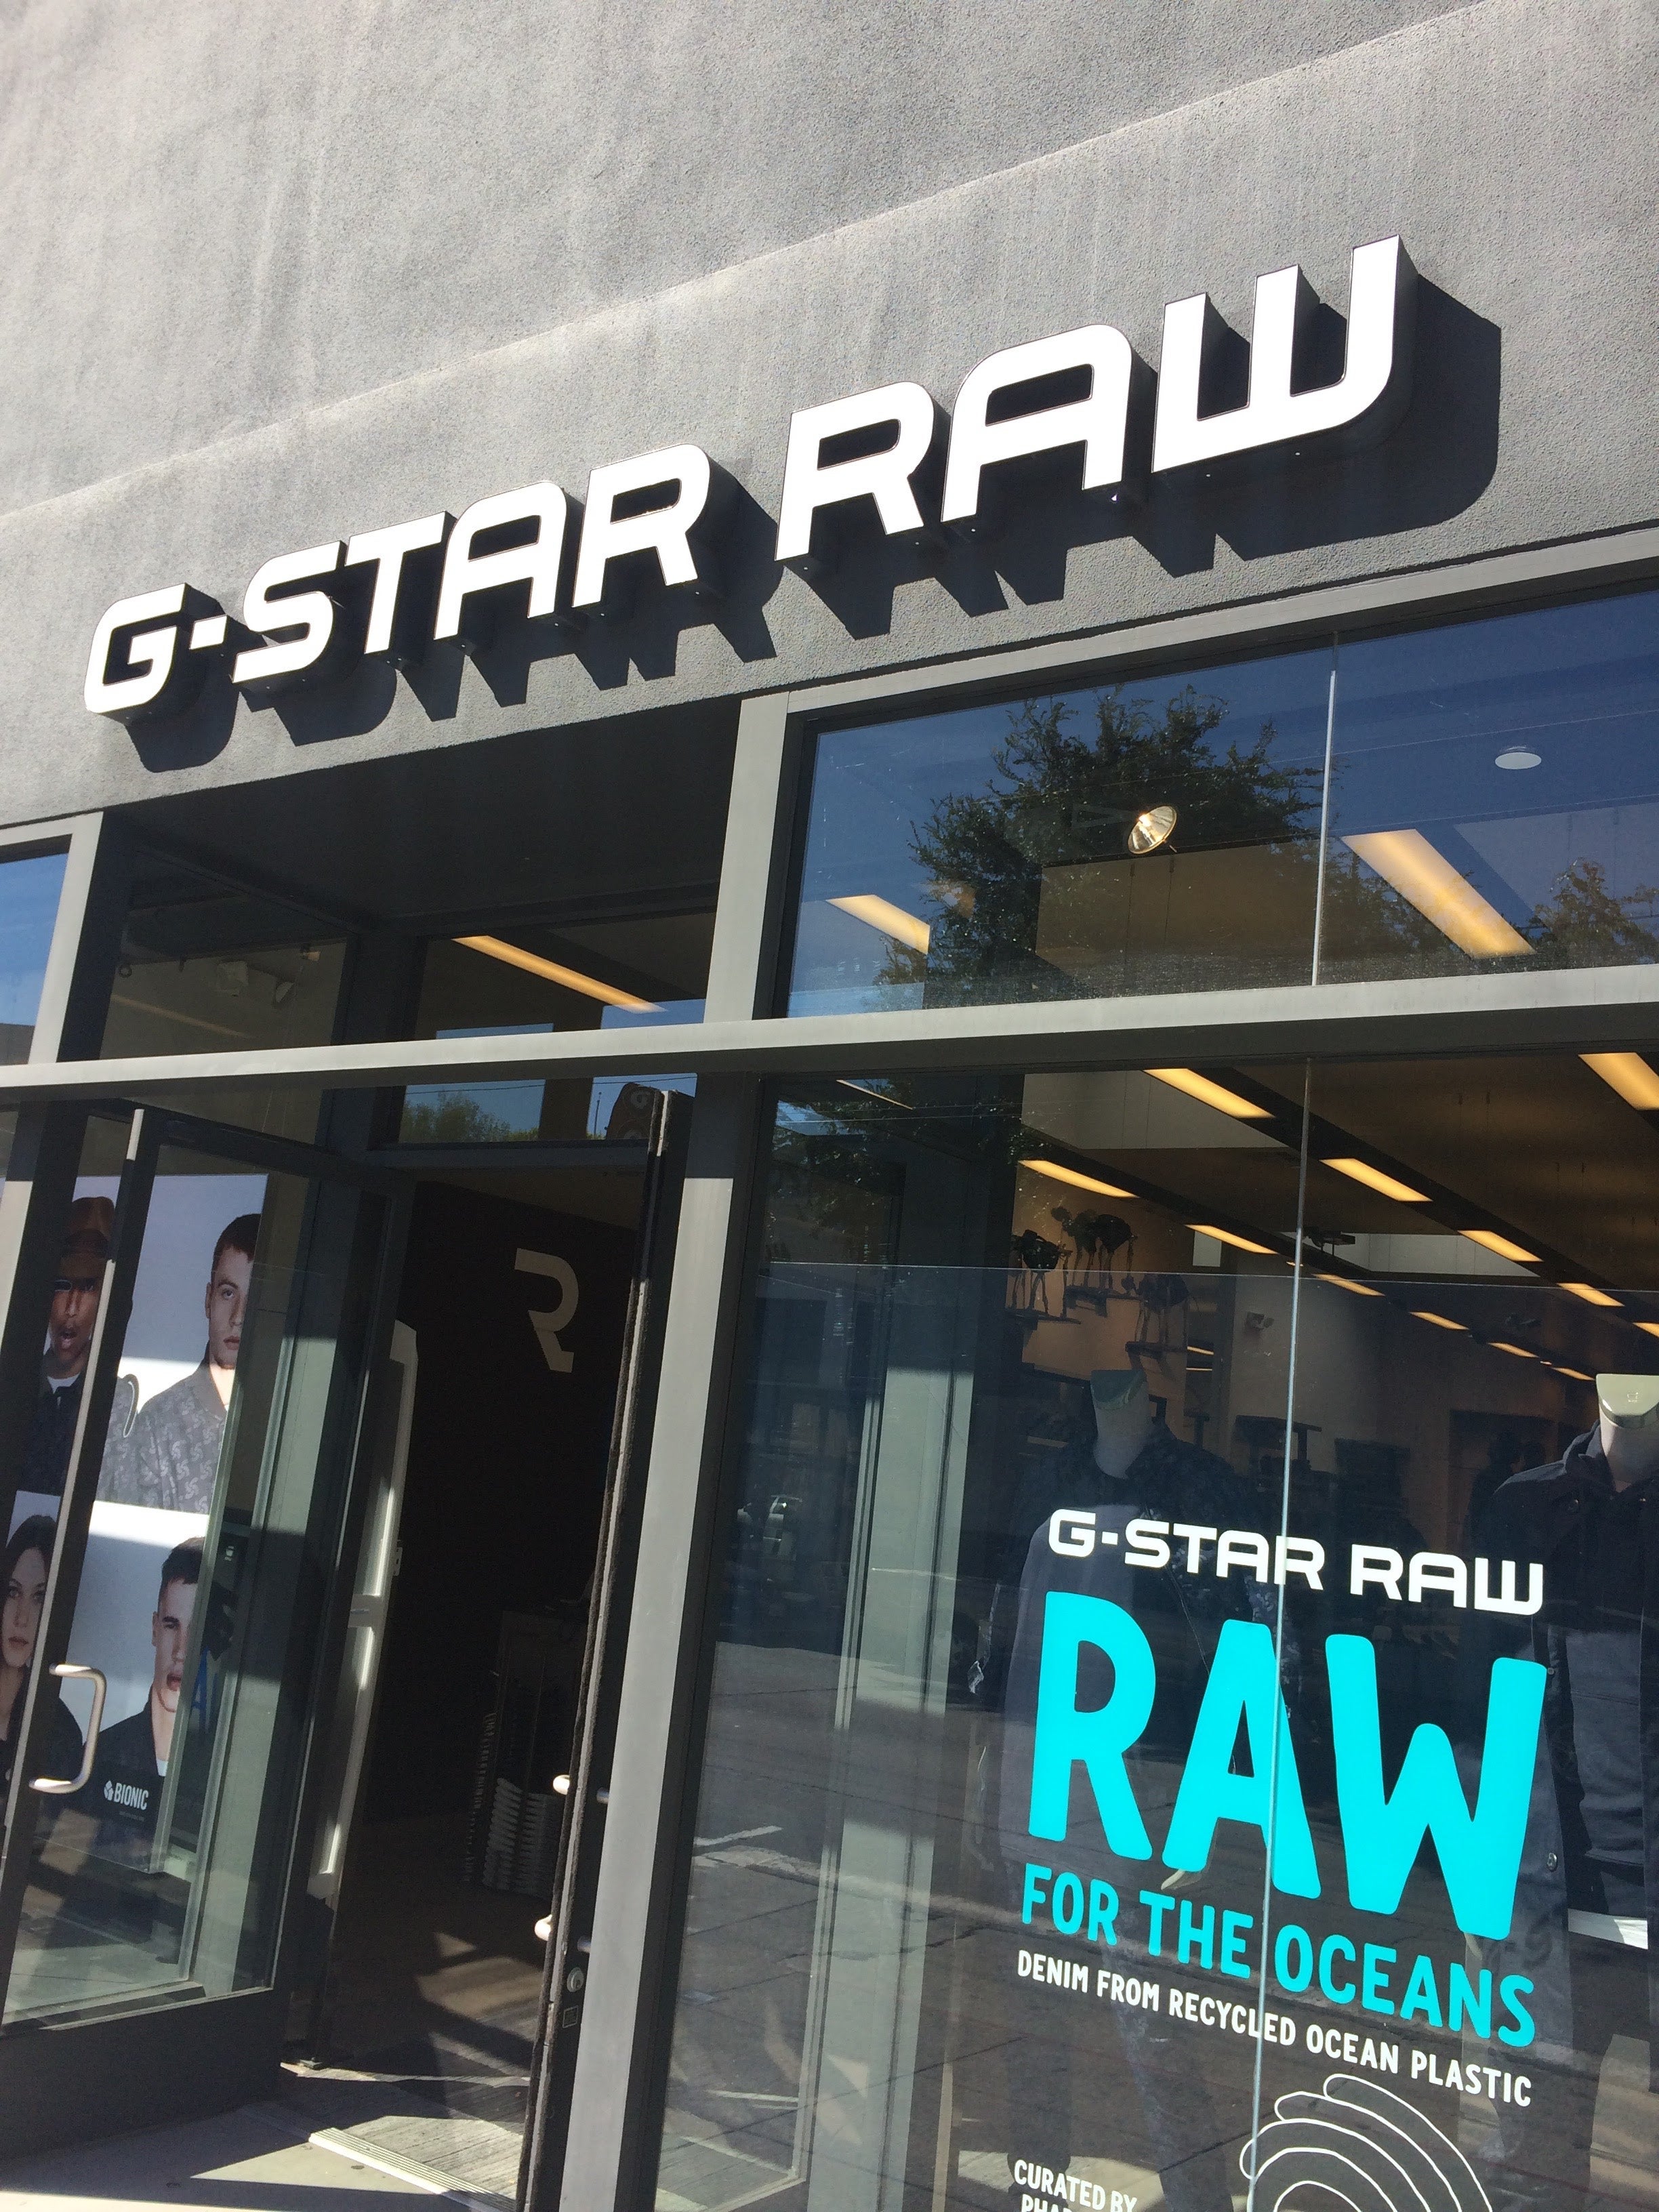 G-Star Raw permanently closes 57 stores after failing to find a